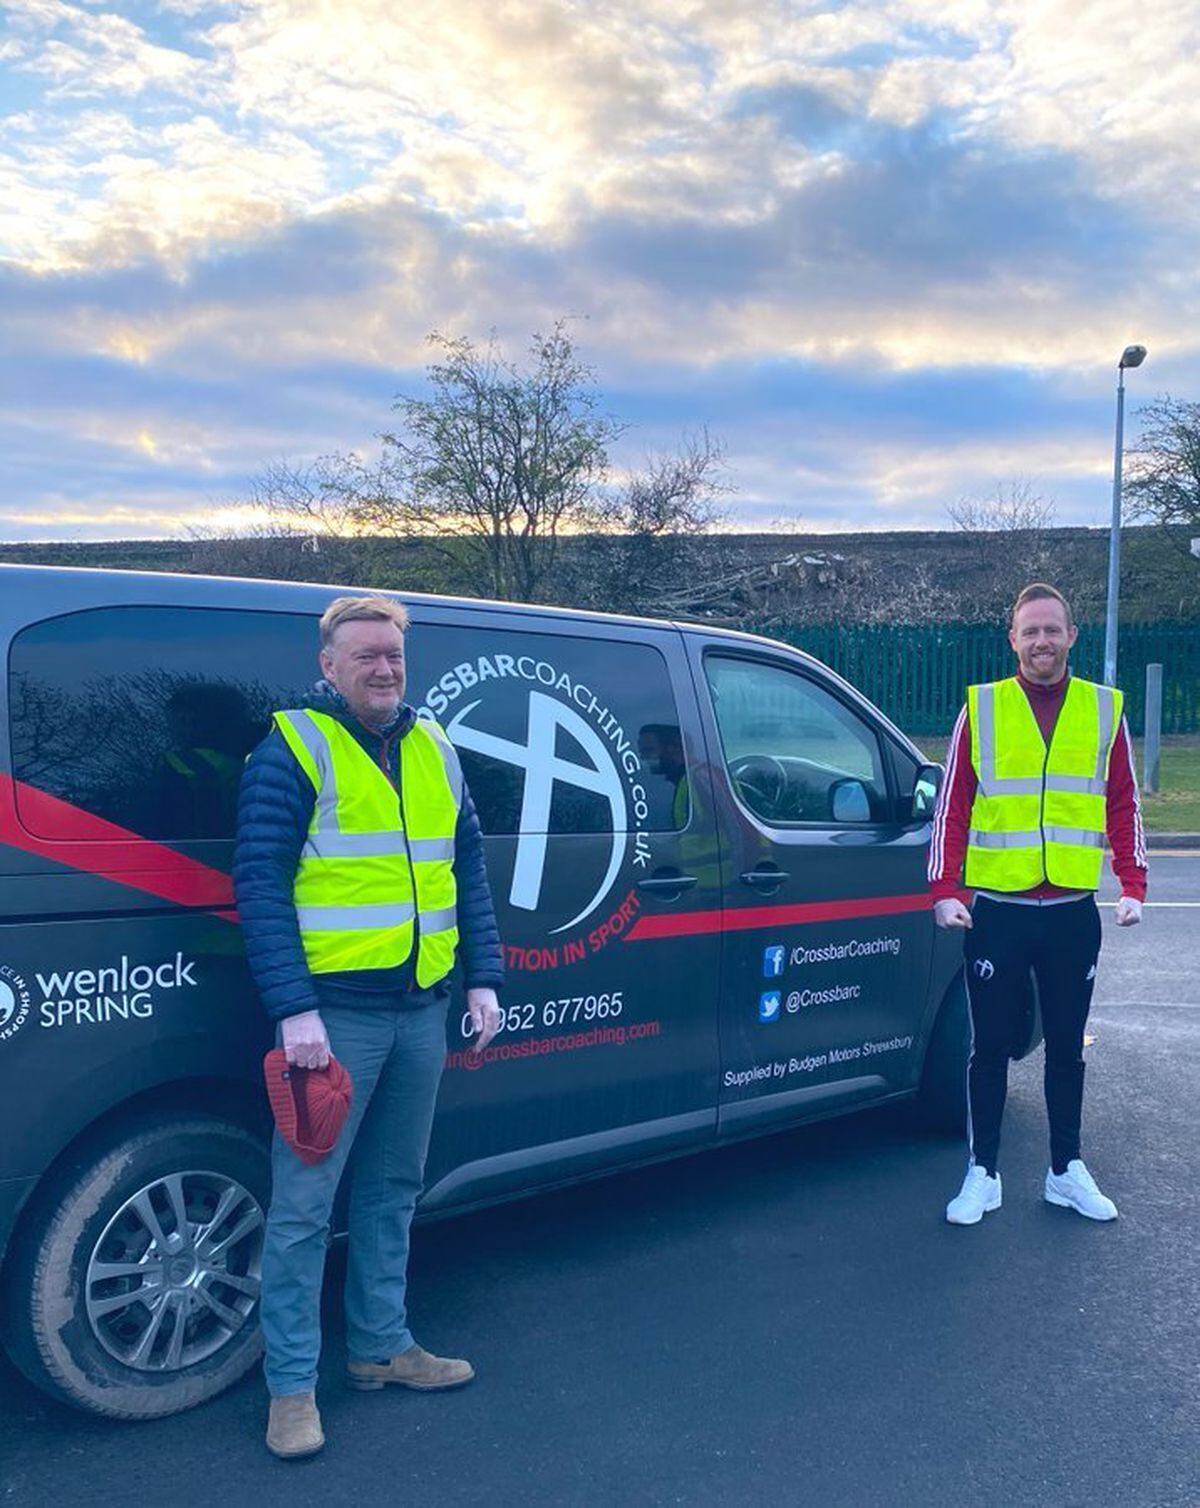 AFC Telford United manager Gavin Cowan and a colleague were out delivering essential items to those in the community in need during the Covid-19 pandemic. Pic: Crossbar Coaching Twitter